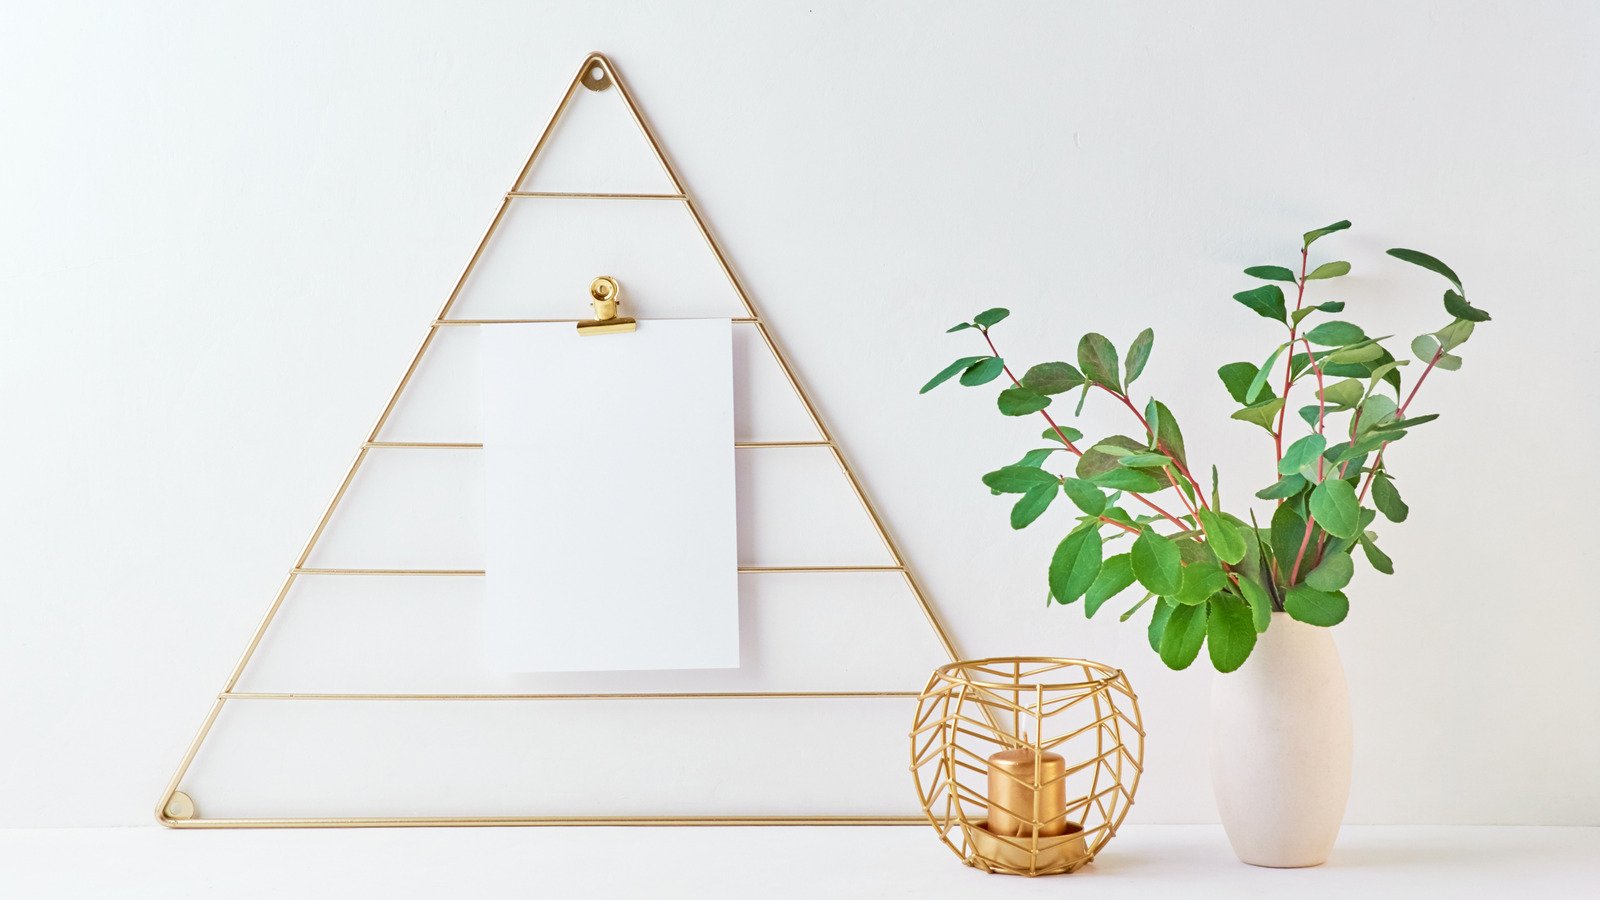 15 Items You Can Use To Organize Your Desk